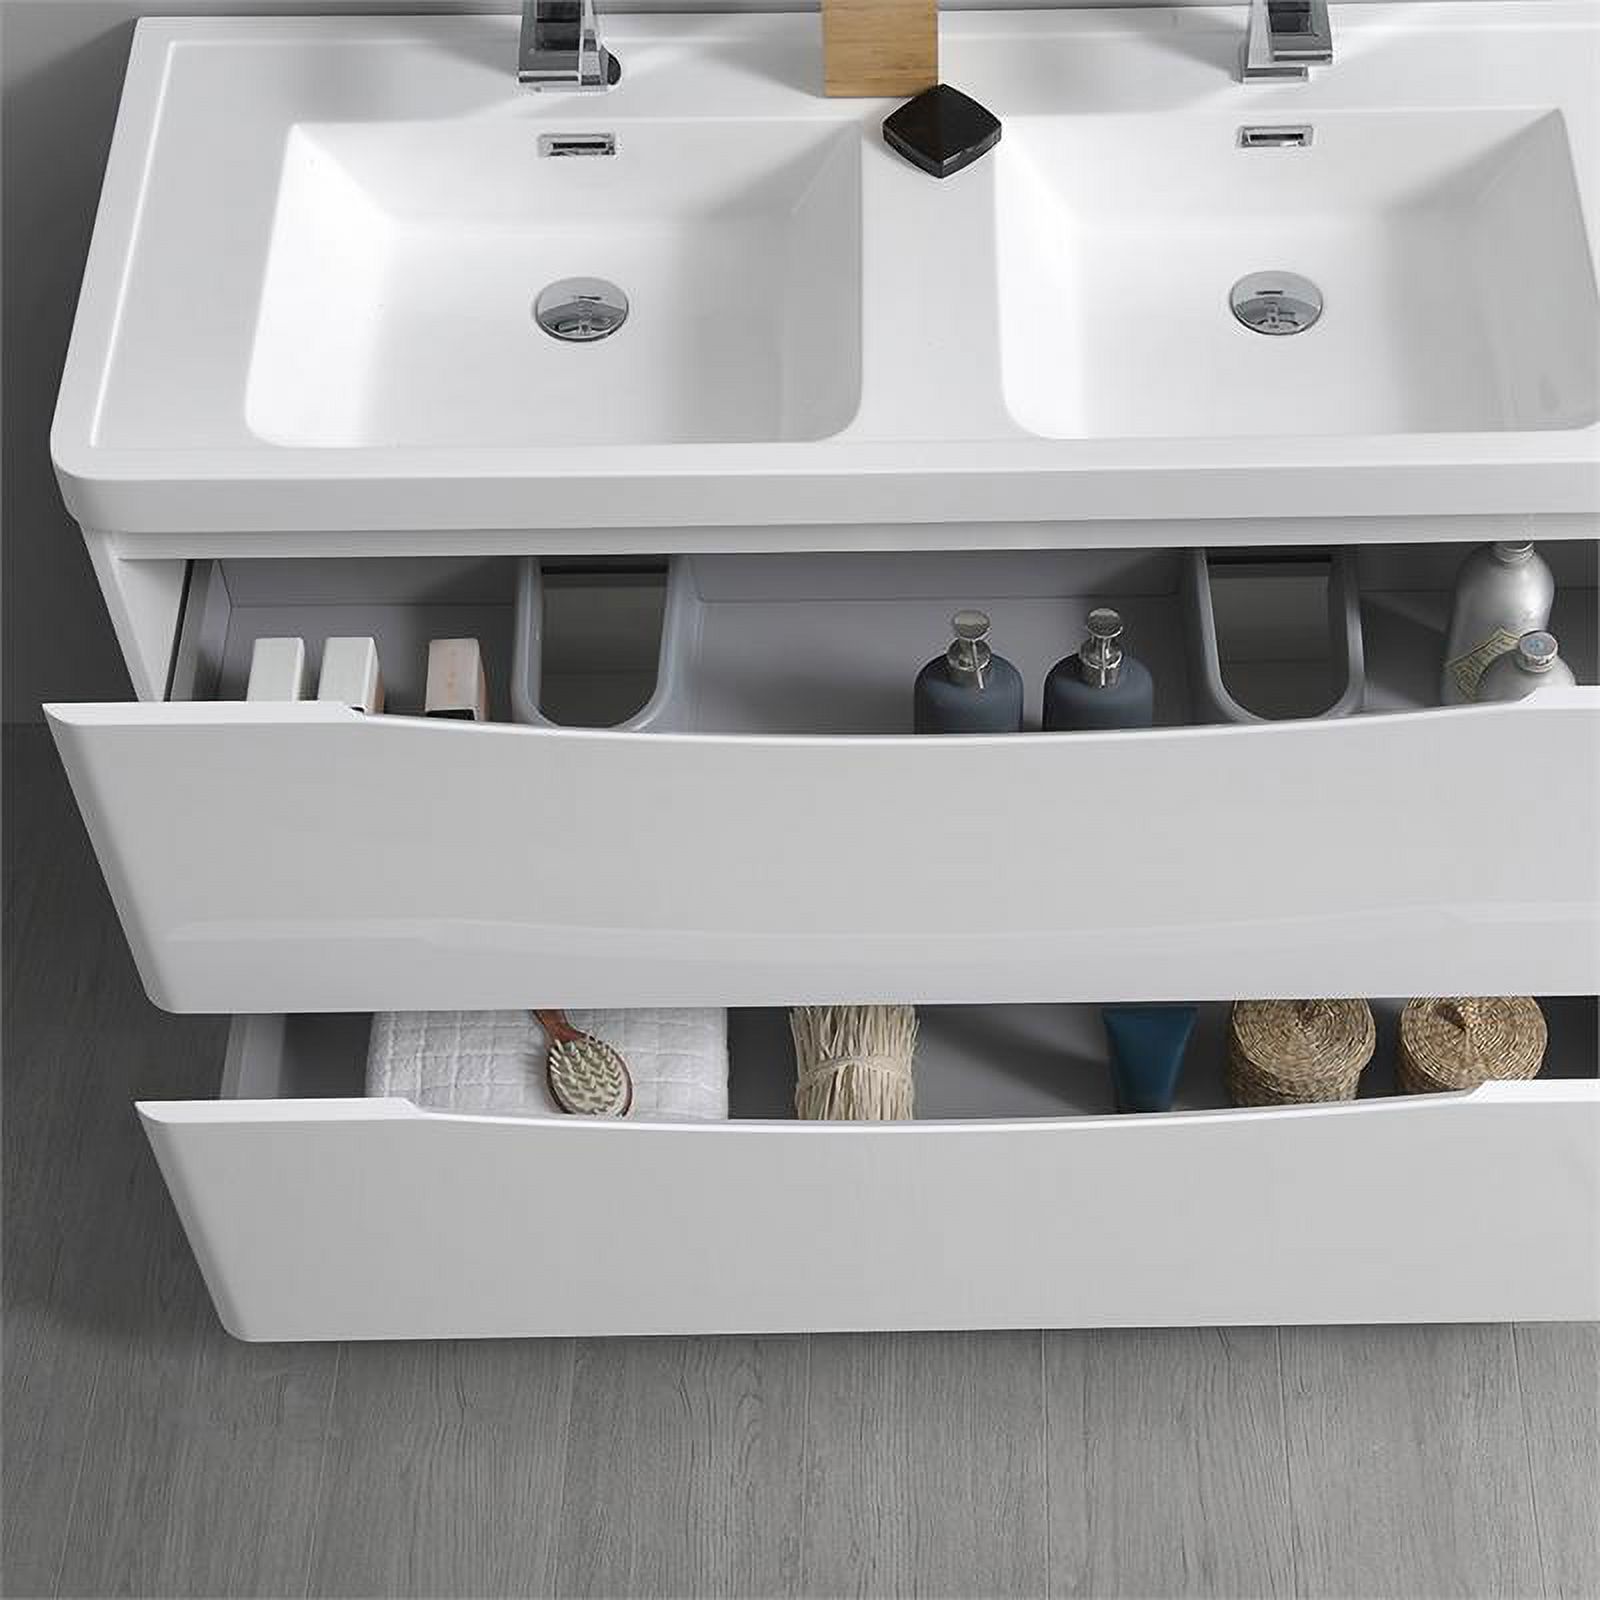 Fresca Tuscany 48" Wood Bathroom Vanity with Double Sinks in Glossy White - image 4 of 8